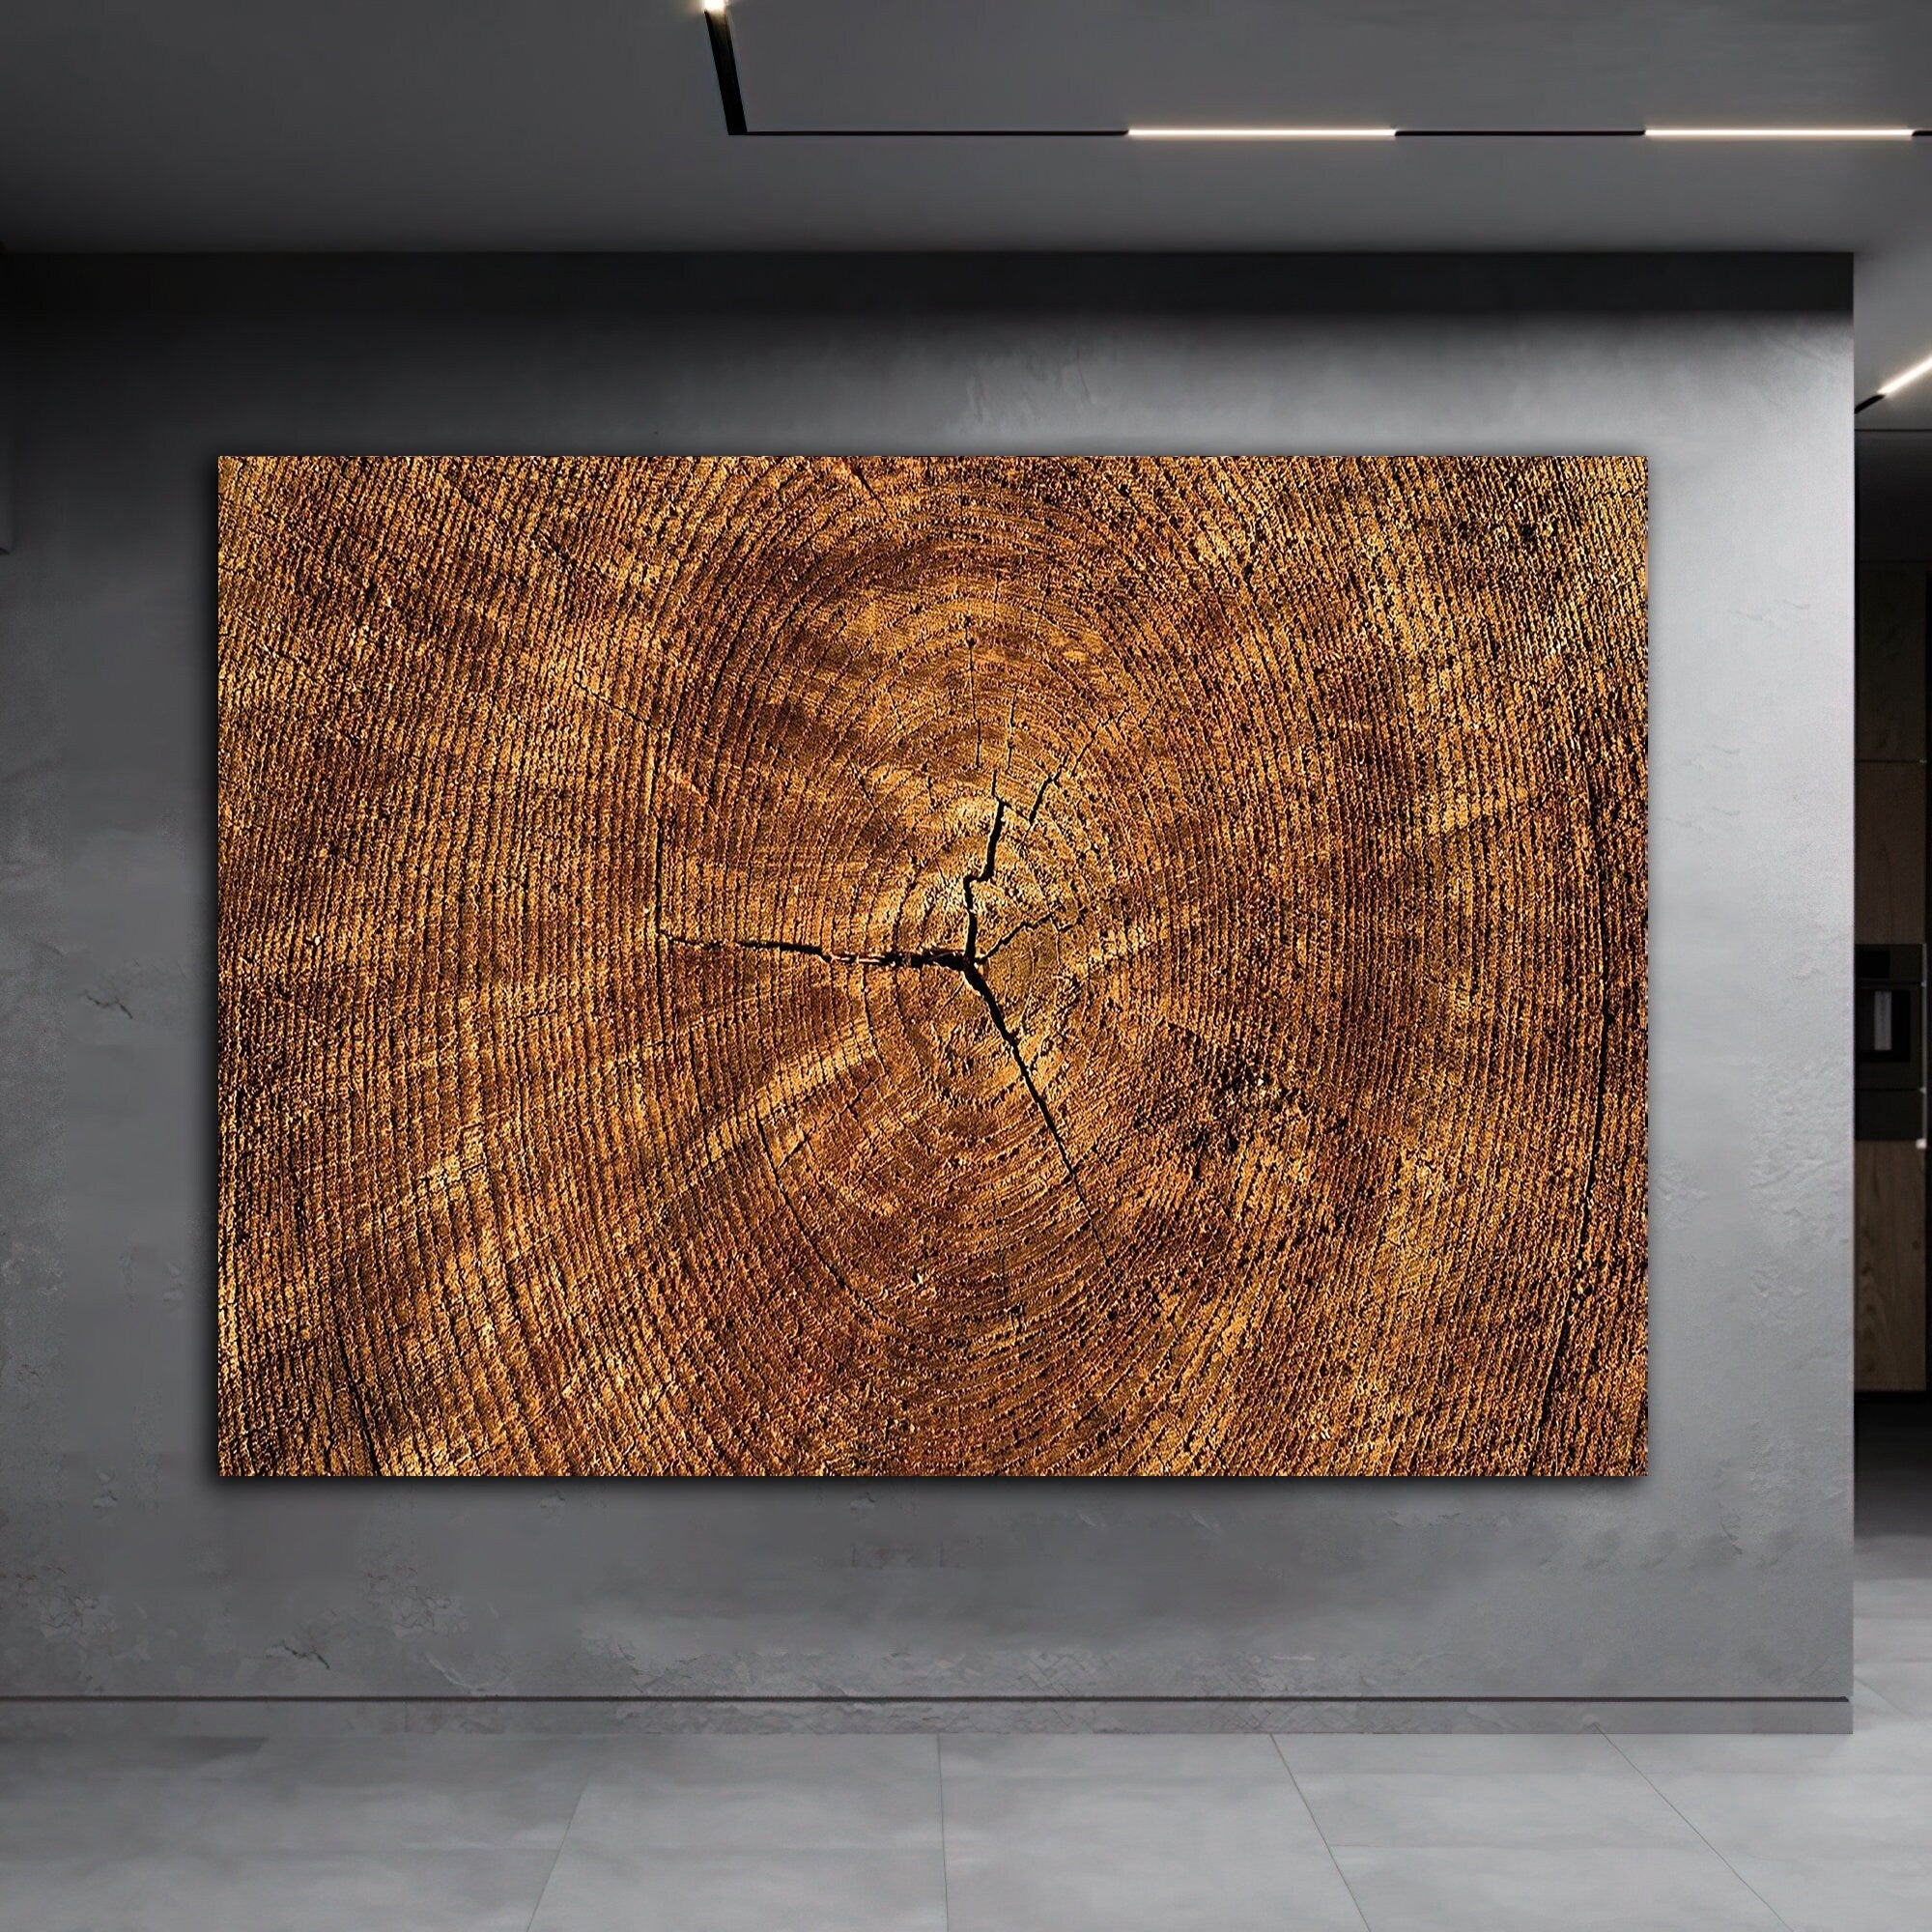 tree crack abstract canvas painting, wood look canvas painting, tree painting, cracks abstract canvas painting, wood pattern image painting Framed Art